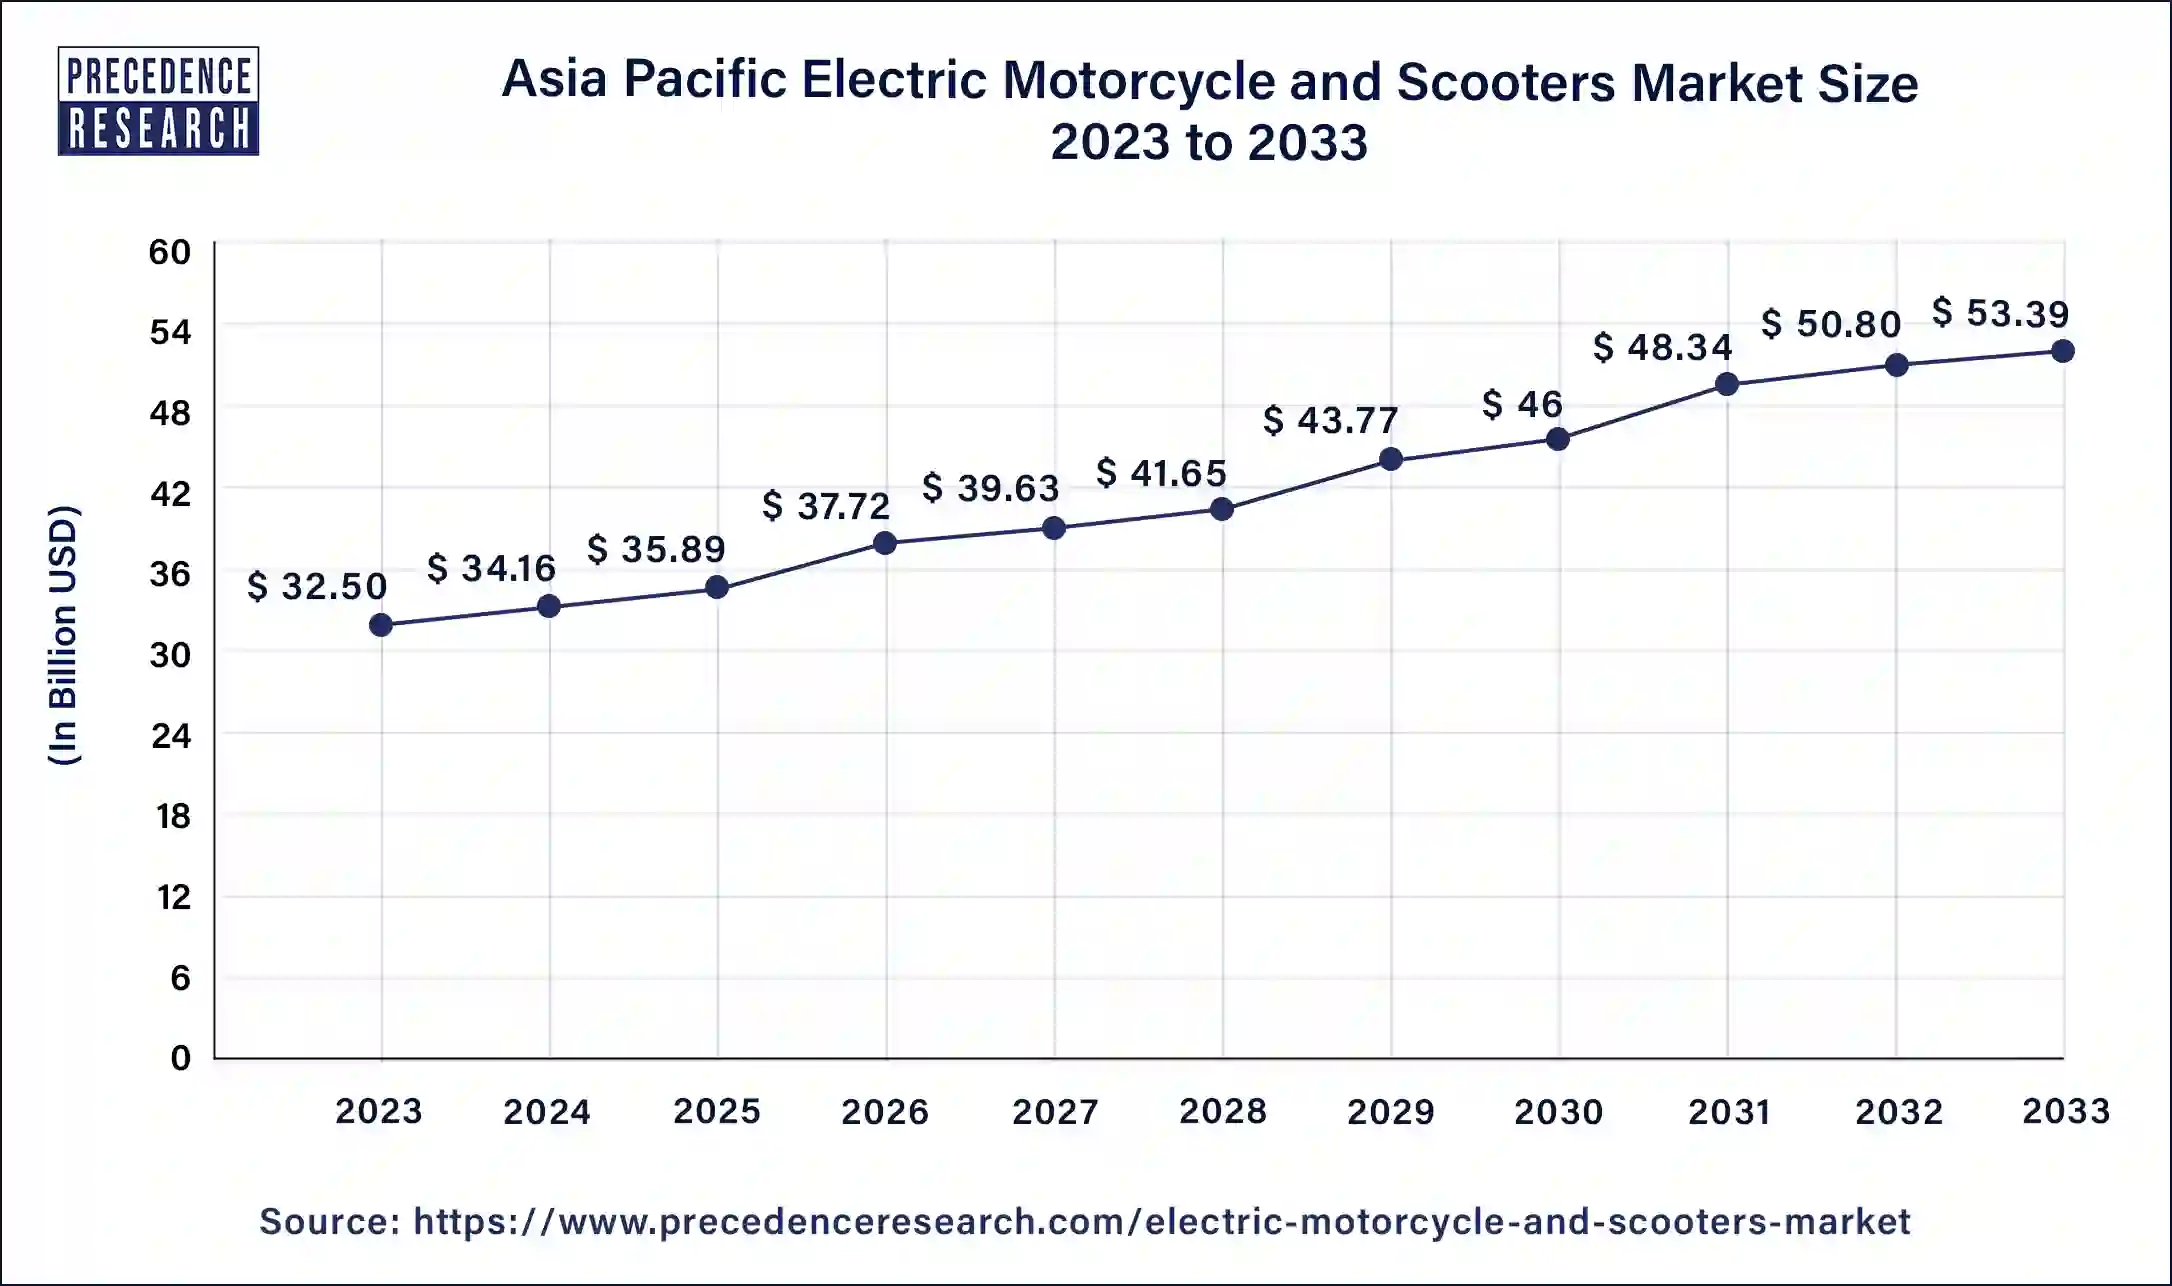 Asia Pacific Electric Motorcycle and Scooters Market Size 2024 to 2033